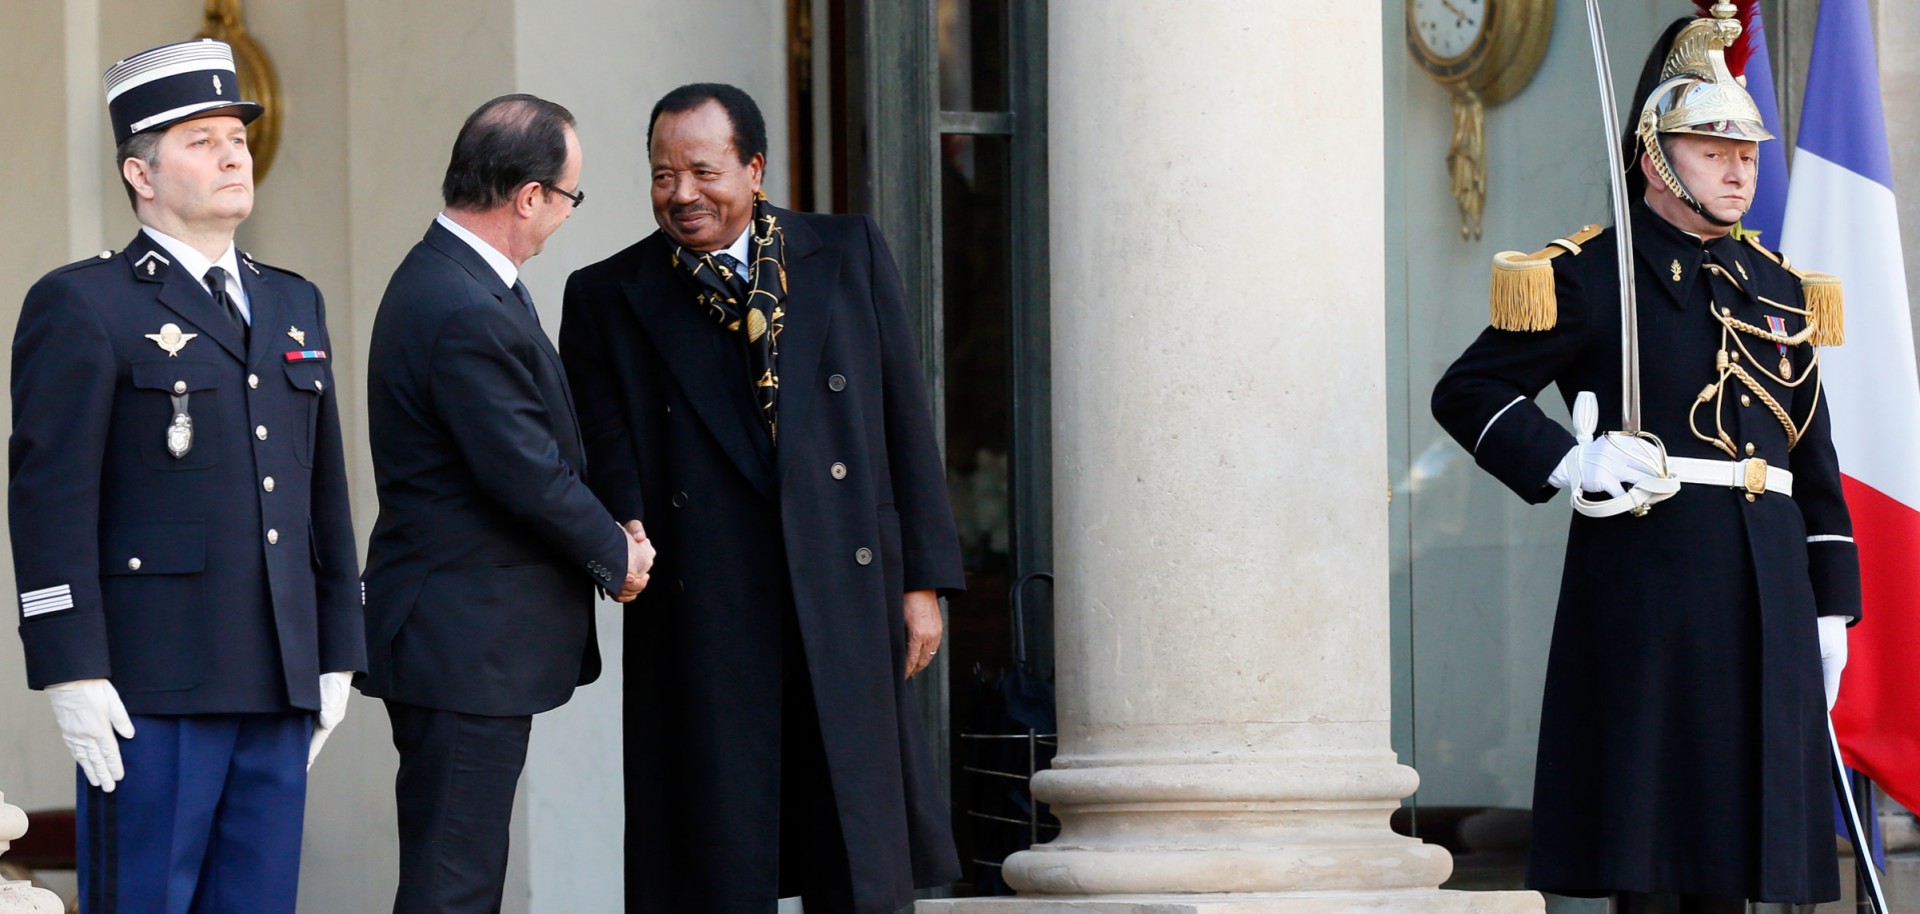 French President Francois Hollande meets Cameroonian President Paul Biya at the Elysee Palace in January 2013. France's colonial legacy in Africa shapes many of today's conflicts. 